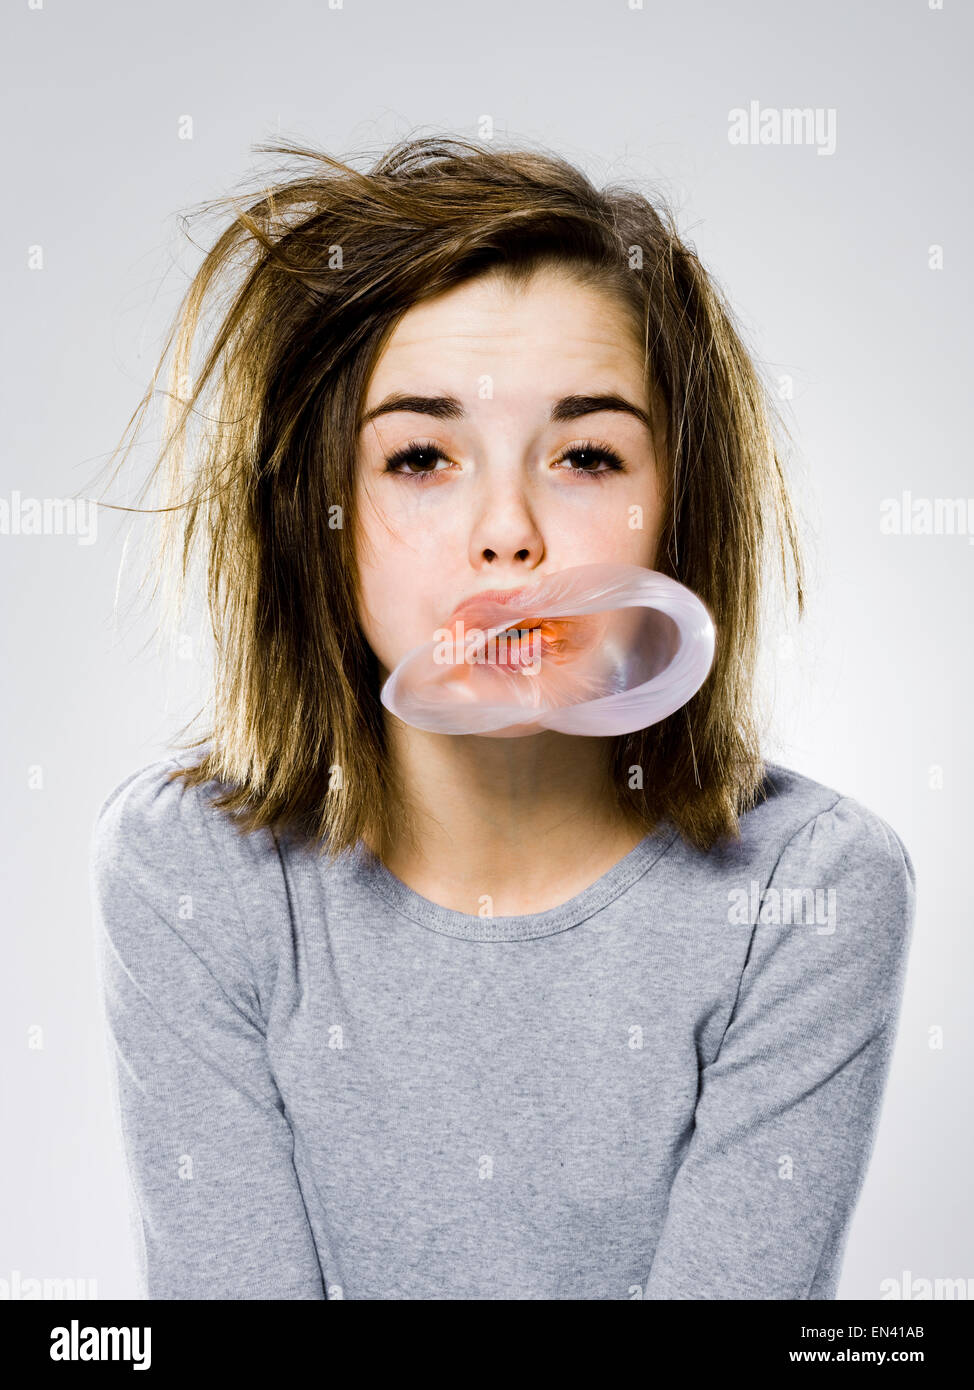 with a appearance popping a bubble gum bubble Stock Alamy